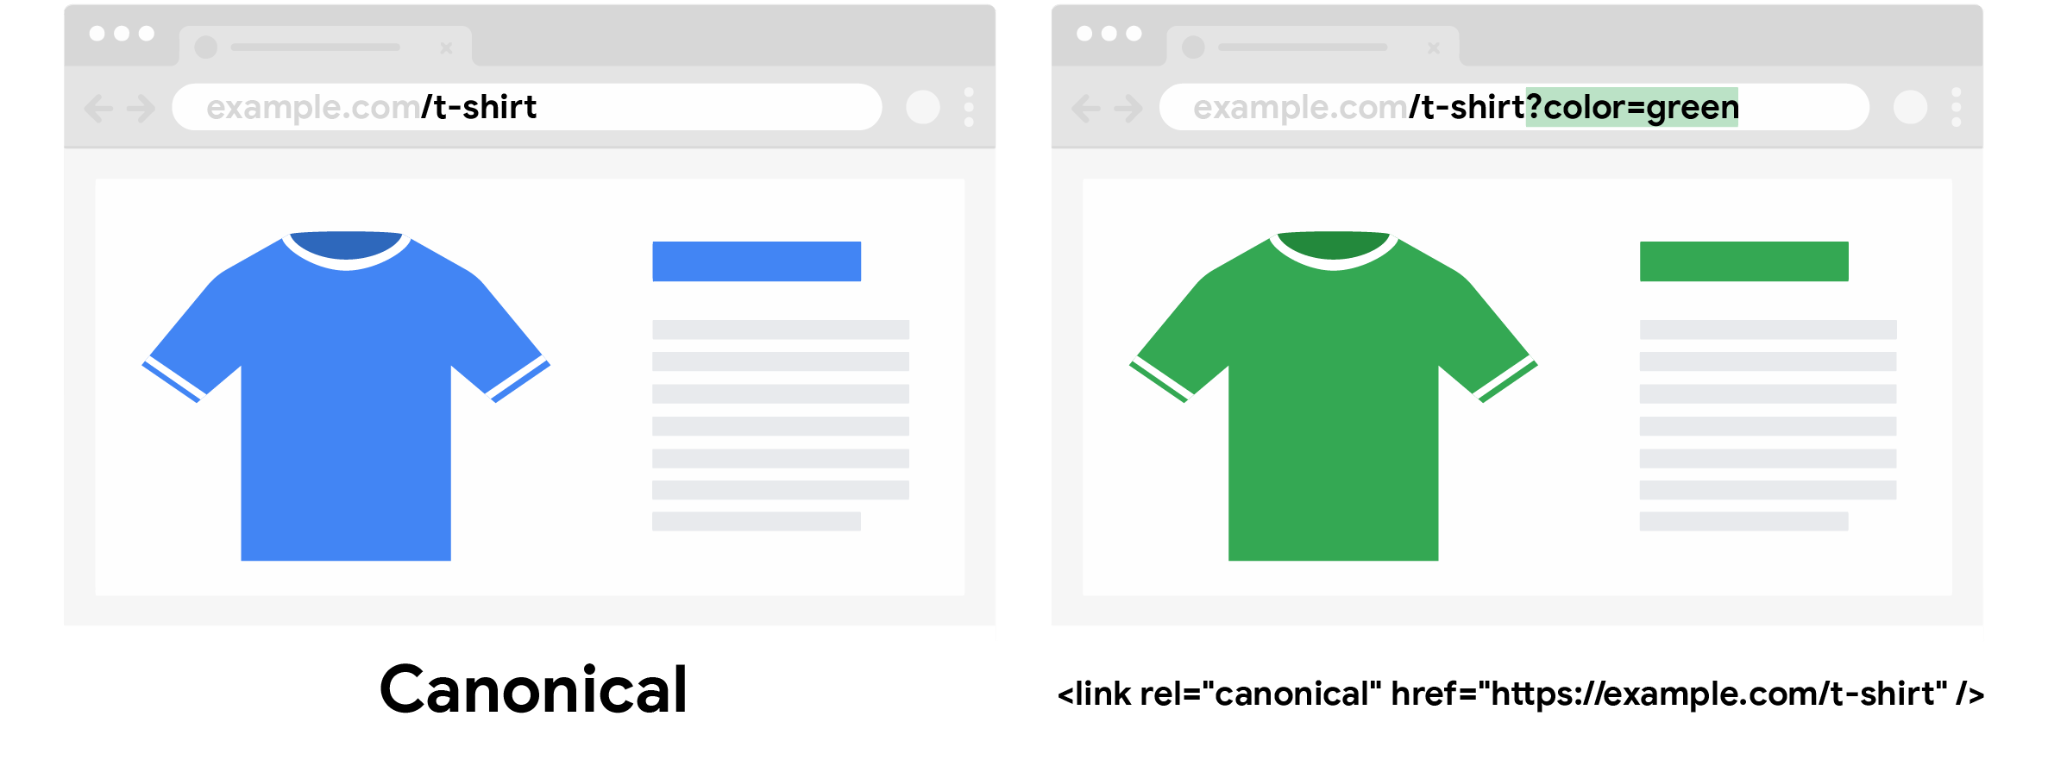 A canonical blue T-shirt without color query parameter and a non-canonical green T-shirt with color query parameter specified